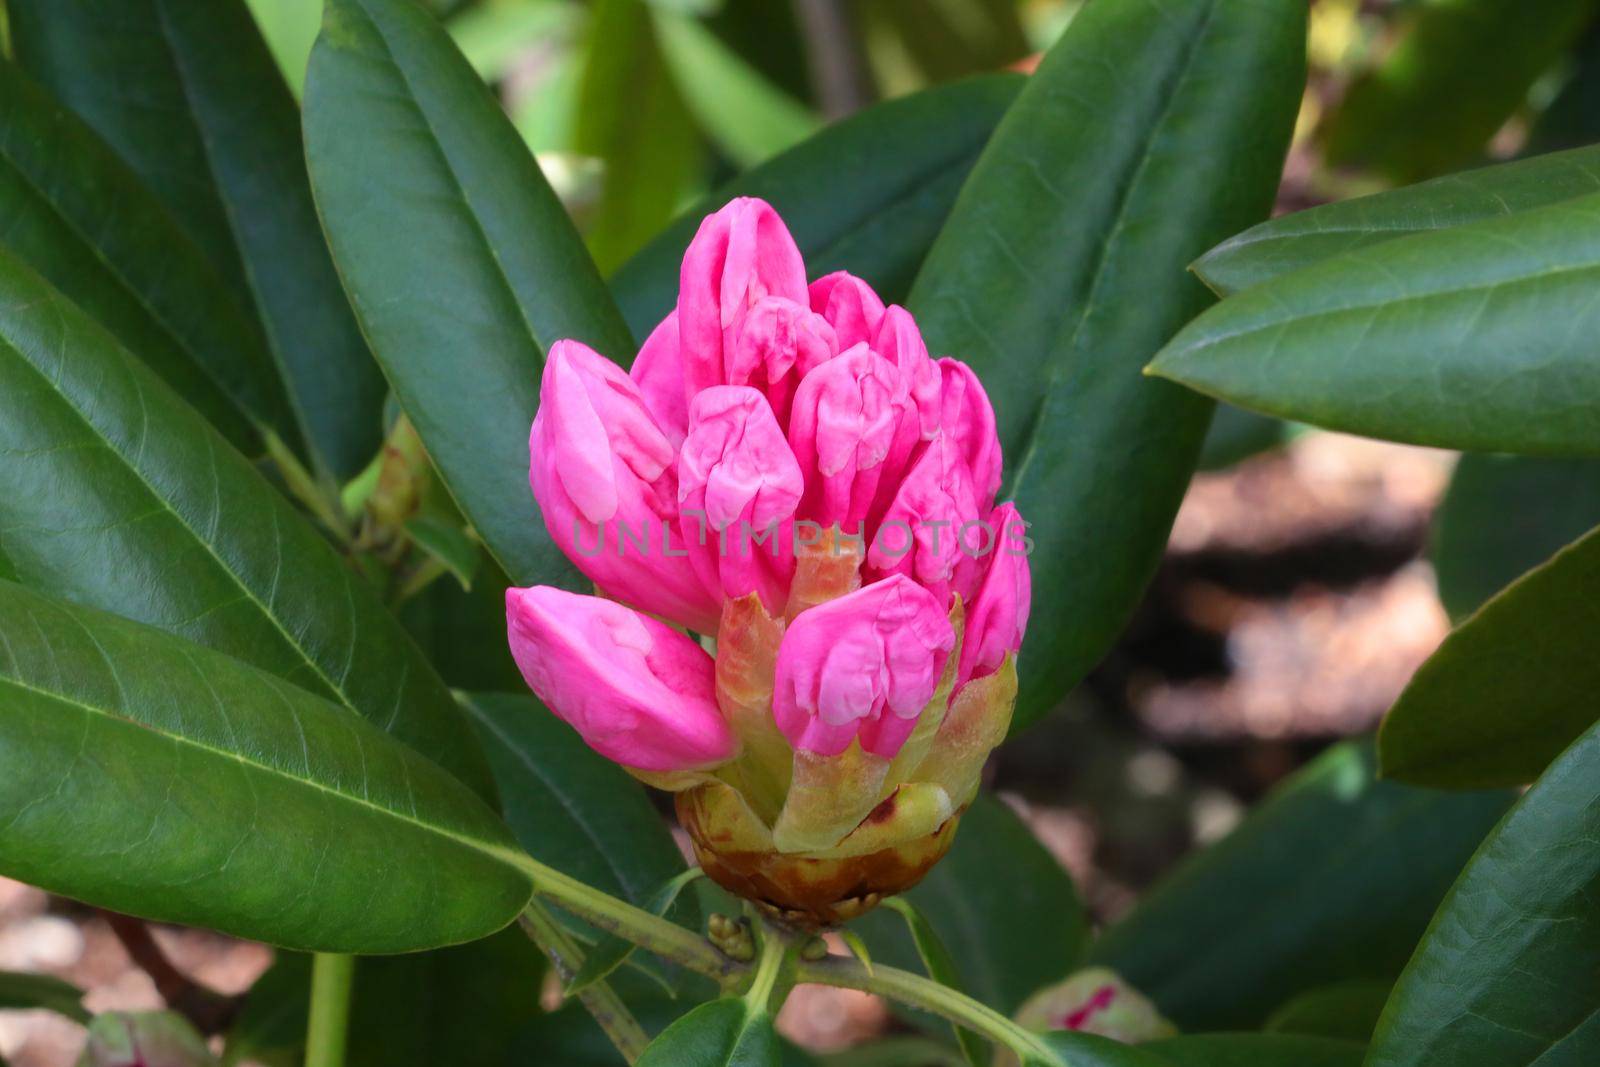 A red flowering rhododendron bud in the park in the spring